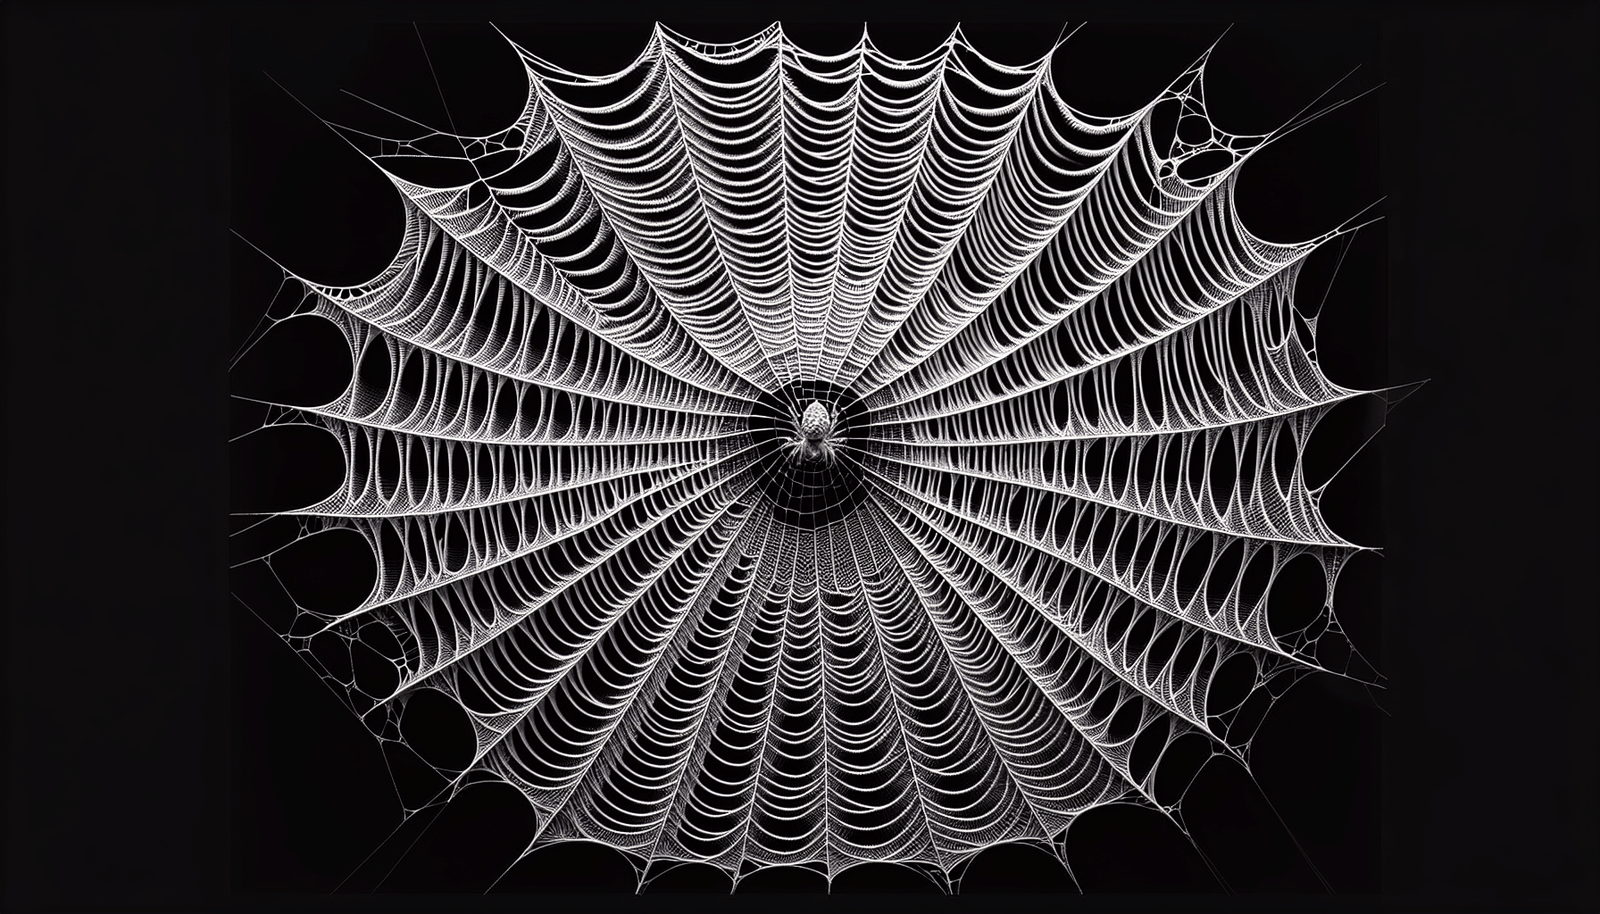 Are There Any Spider Species Known For Their Impressive Web Architecture, Aside From Orb-weavers?